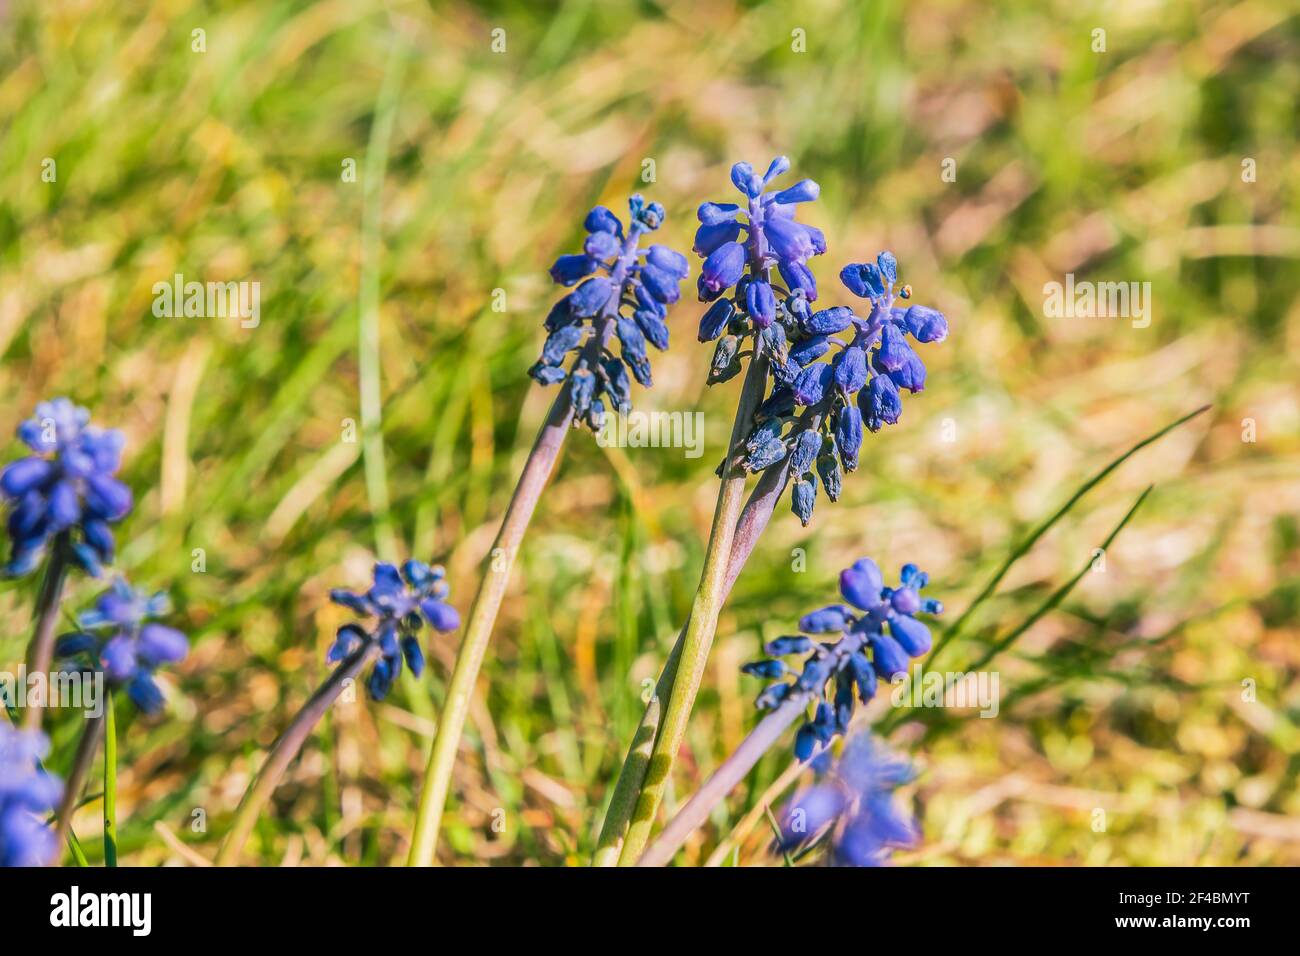 Meadow in spring with sunshine. single grass with wildflowers. Purple flowers of vineyard grape hyacinth from genus grape hyacinth in the asparagus Stock Photo